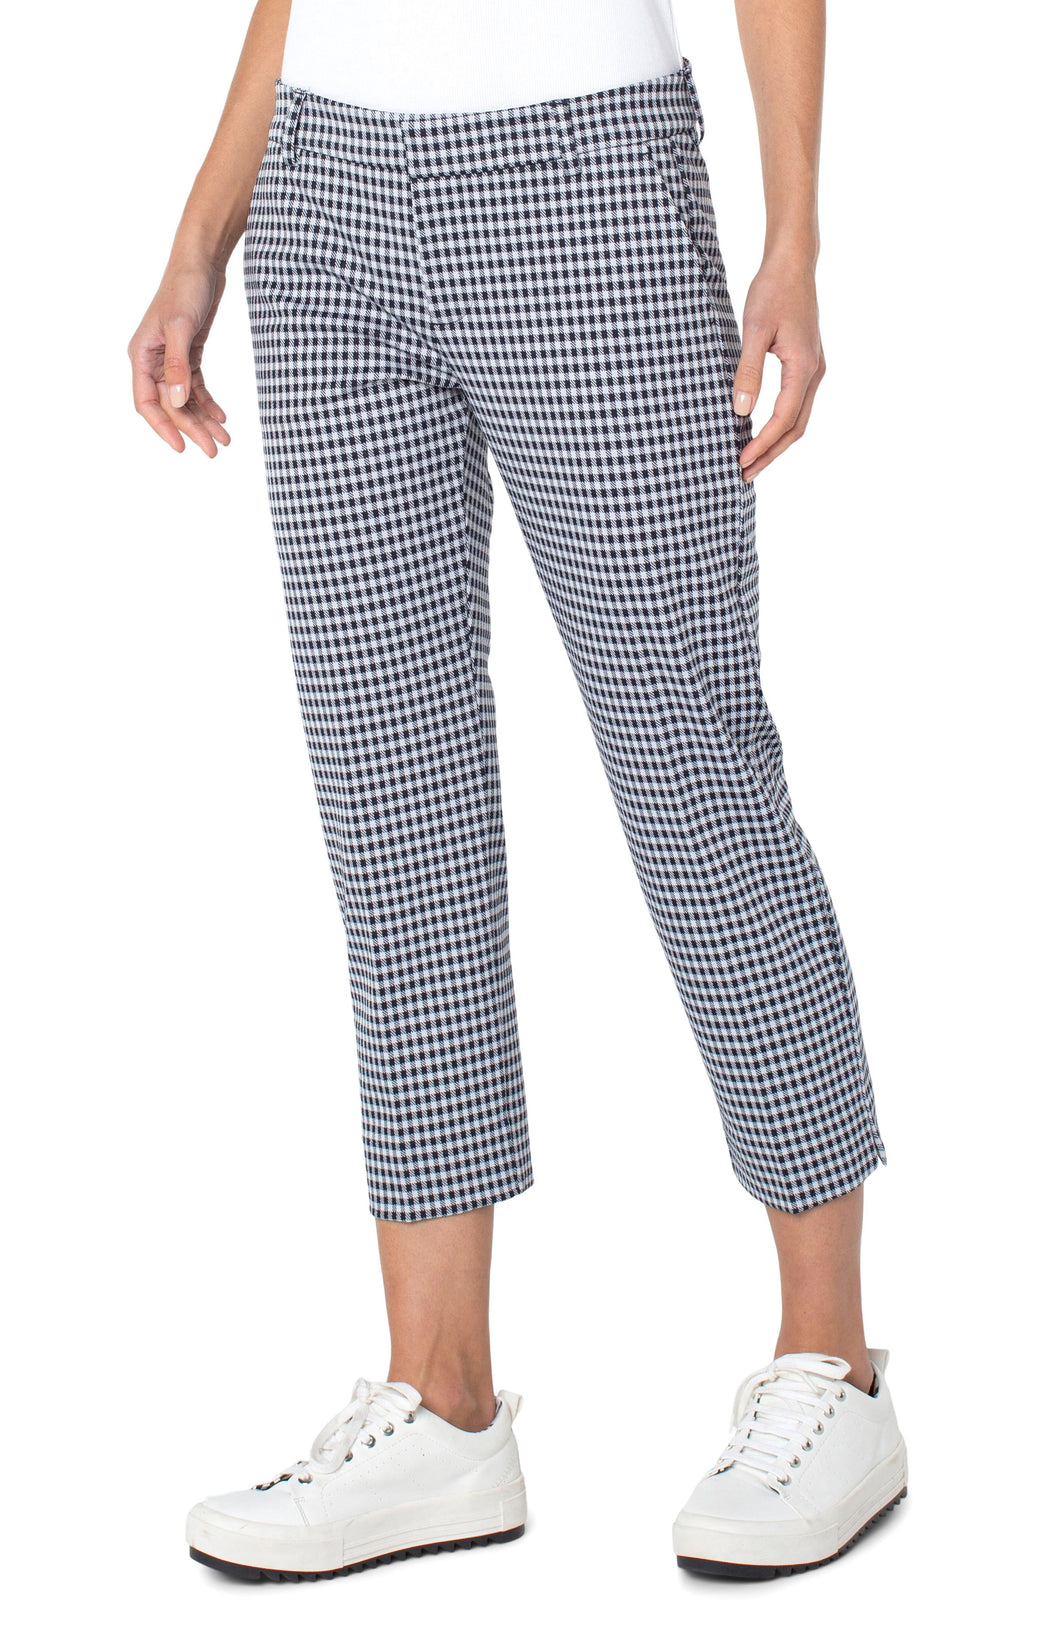 KELSEY KNIT NAVY AND WHITE GINGHAM CROP TROUSER - LIVERPOOL LOS ANGELES